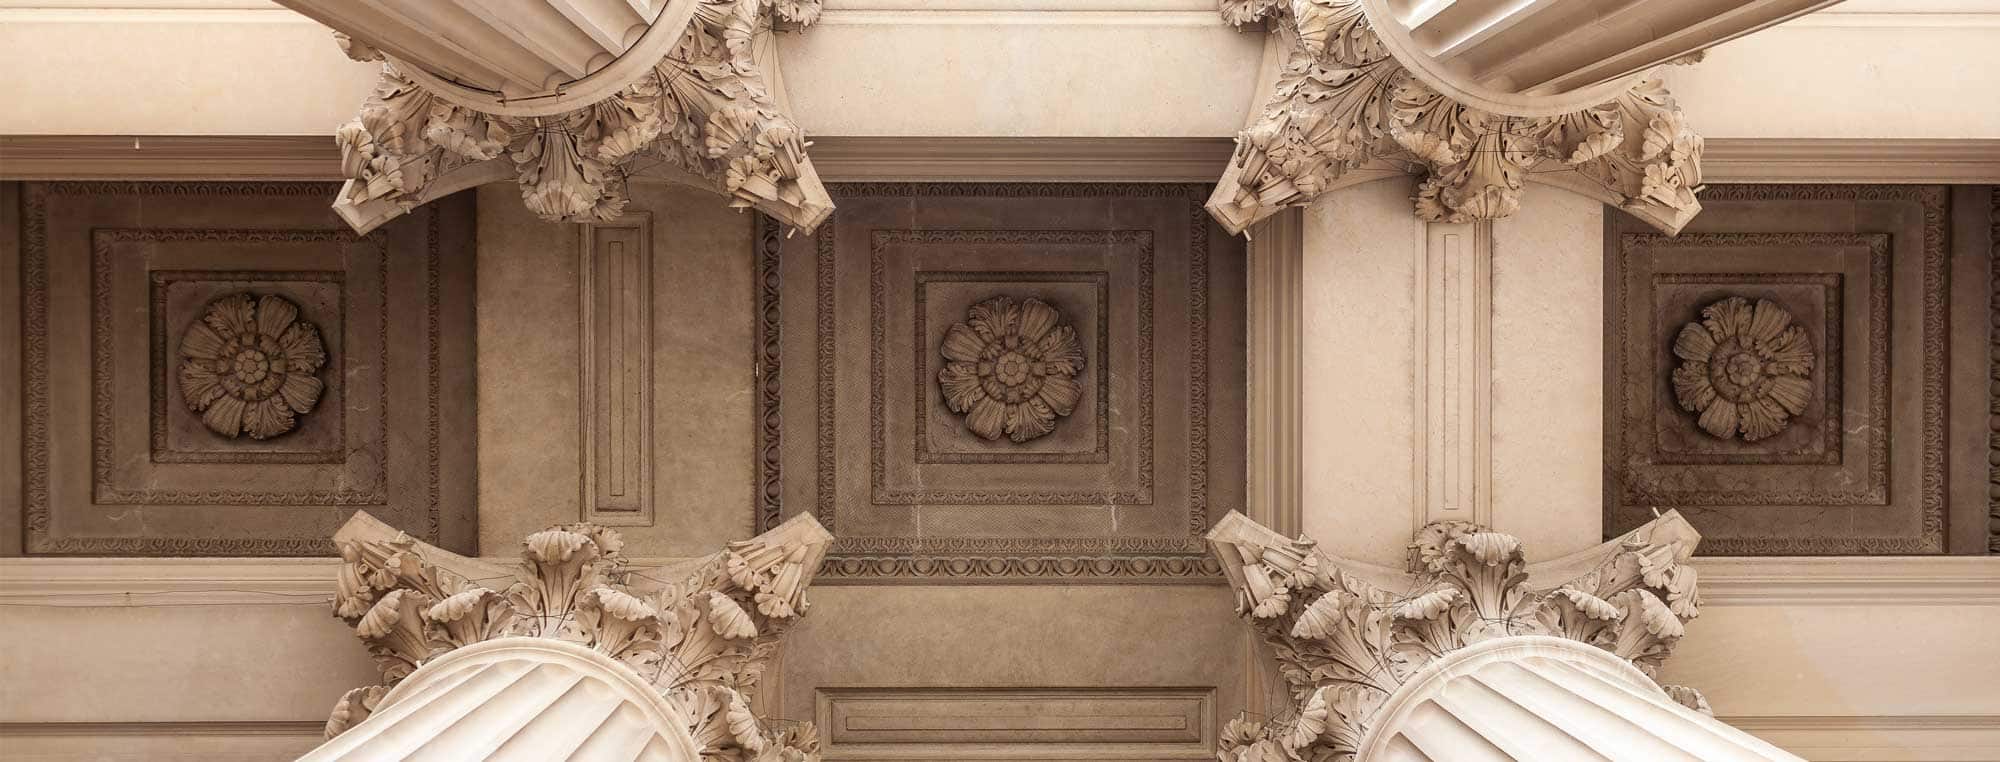 Ceiling details with columns